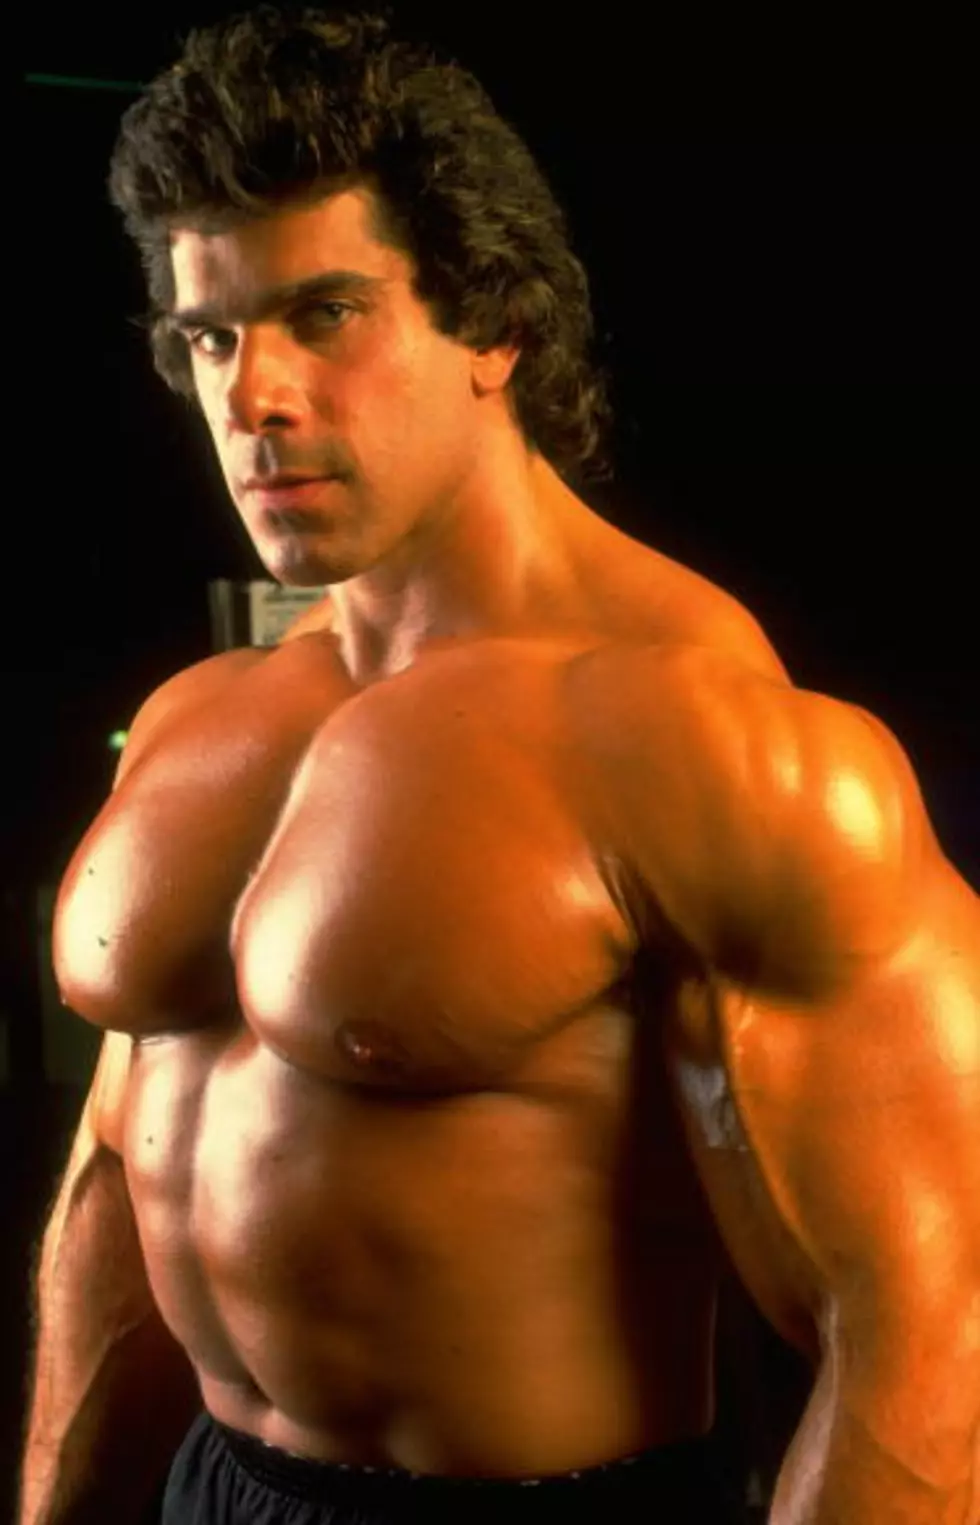 Actor/Bodybuilder Lou Ferrigno Talks About Getting Fired From Celebrity Apprentice On The KLAQ Morning Show [Audio]